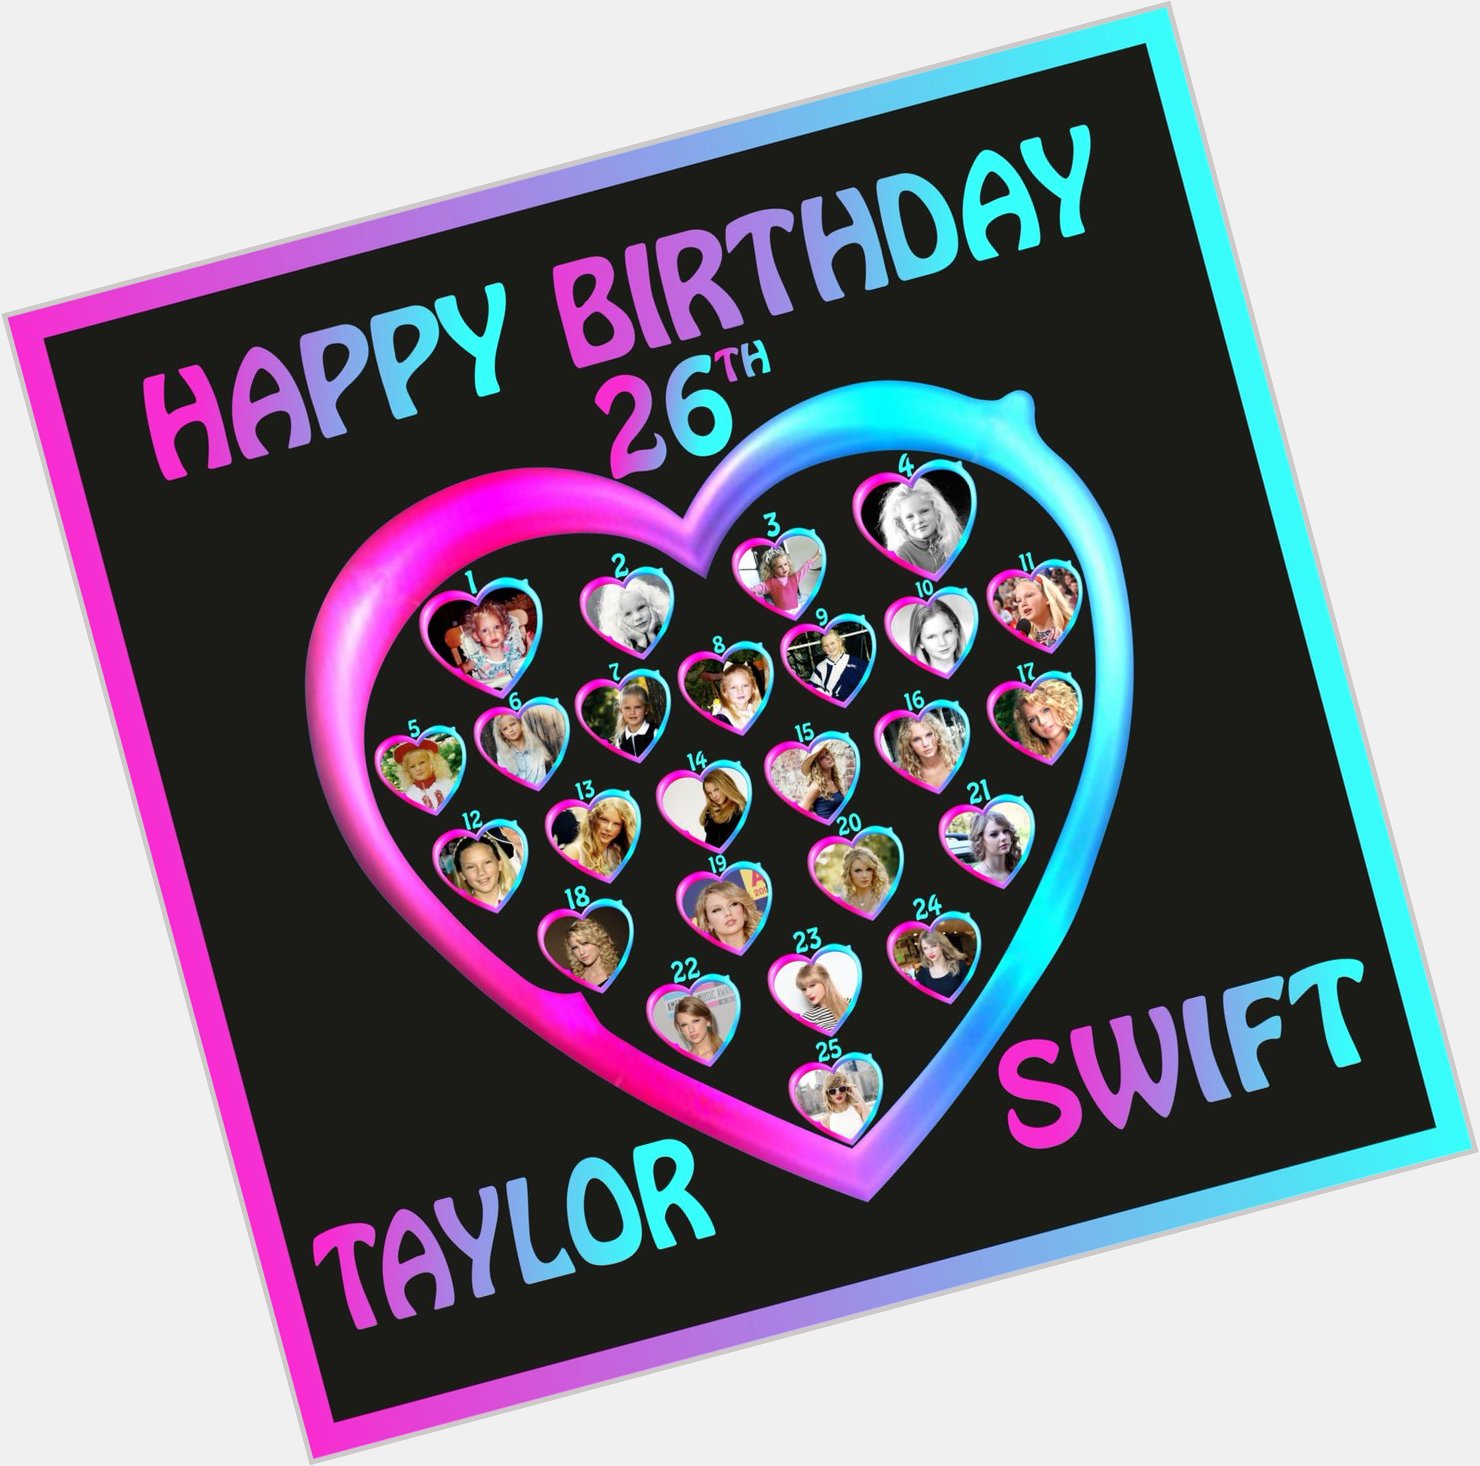 Happy birthday to the brightest star in the galaxy.   Taylor Swift 